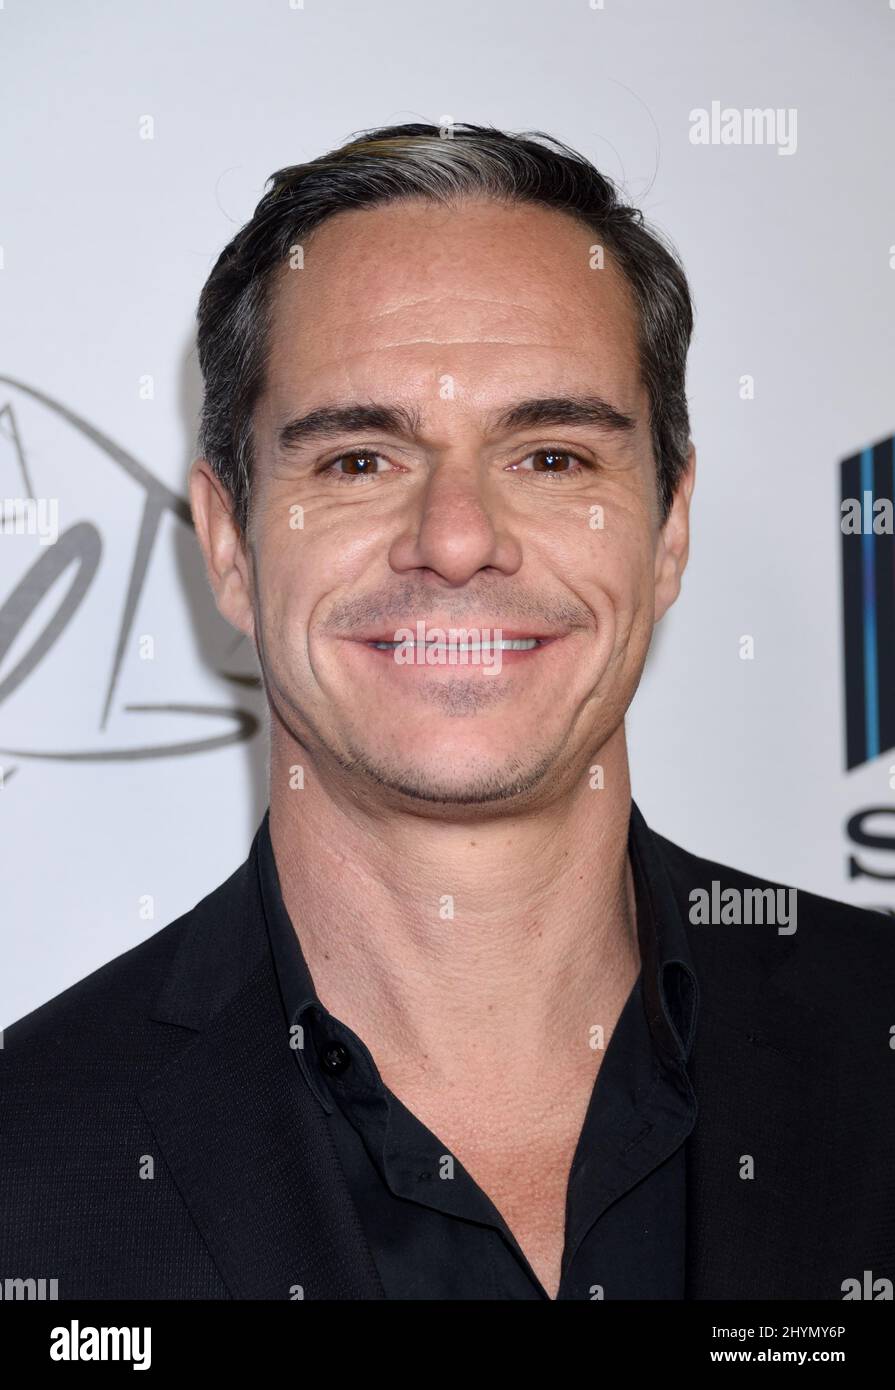 Tony Dalton at AMC's 'Better Call Saul' Season 5 Special Premiere Event held at the ArcLight Cinemas Hollywood on February 5, 2020 in Hollywood, CA. Stock Photo